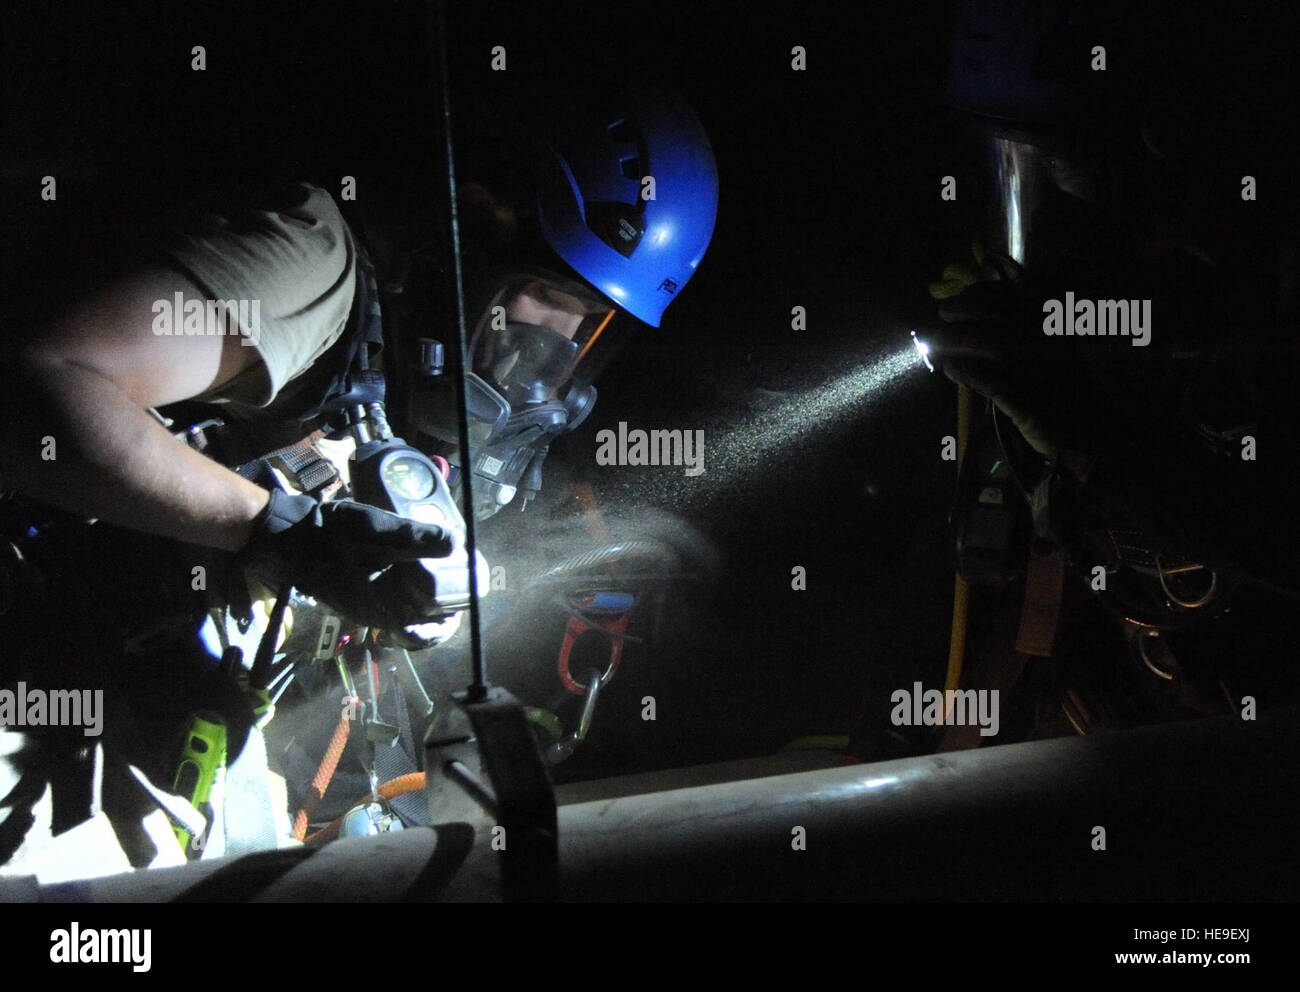 Senior Airman Aaron White, 81st Infrastructure Division firefighter, inspects his regulator air pressure level during confined space rescue operations training Feb. 13, 2015, at the medical center, Keesler Air Force Base, Miss. Keesler hosted the one-time advanced rescue certification training course, which consisted of confined space rescue, high and low angle rescue and stokes basket rescue operations. Eleven students from four bases completed the course.  Kemberly Groue Stock Photo